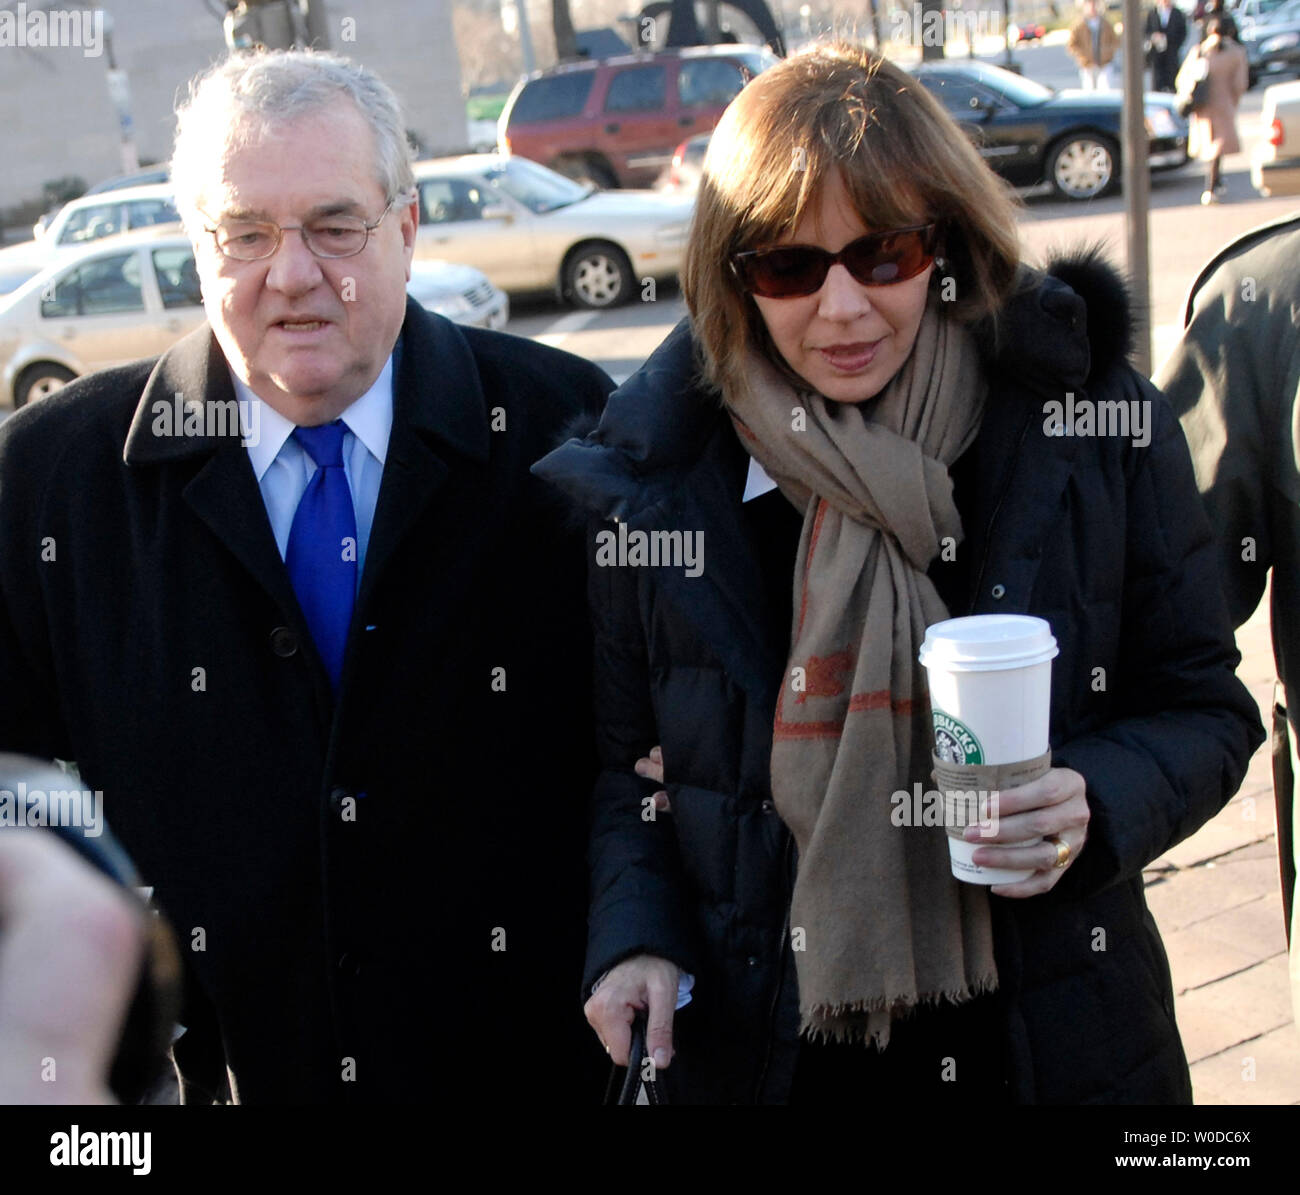 Former New York Times journalist Judith Miller and her attorney Robert Bennett arrive at the U.S. District Court in Washington on January 30, 2007. Miller is to testify at the I. Lewis “Scooter” Libby perjury trial. Libby is on trial for perjury in relation to the leaking of CIA agent Valeria Plame's name to the press.  (UPI Photo/Kevin Dietsch) Stock Photo